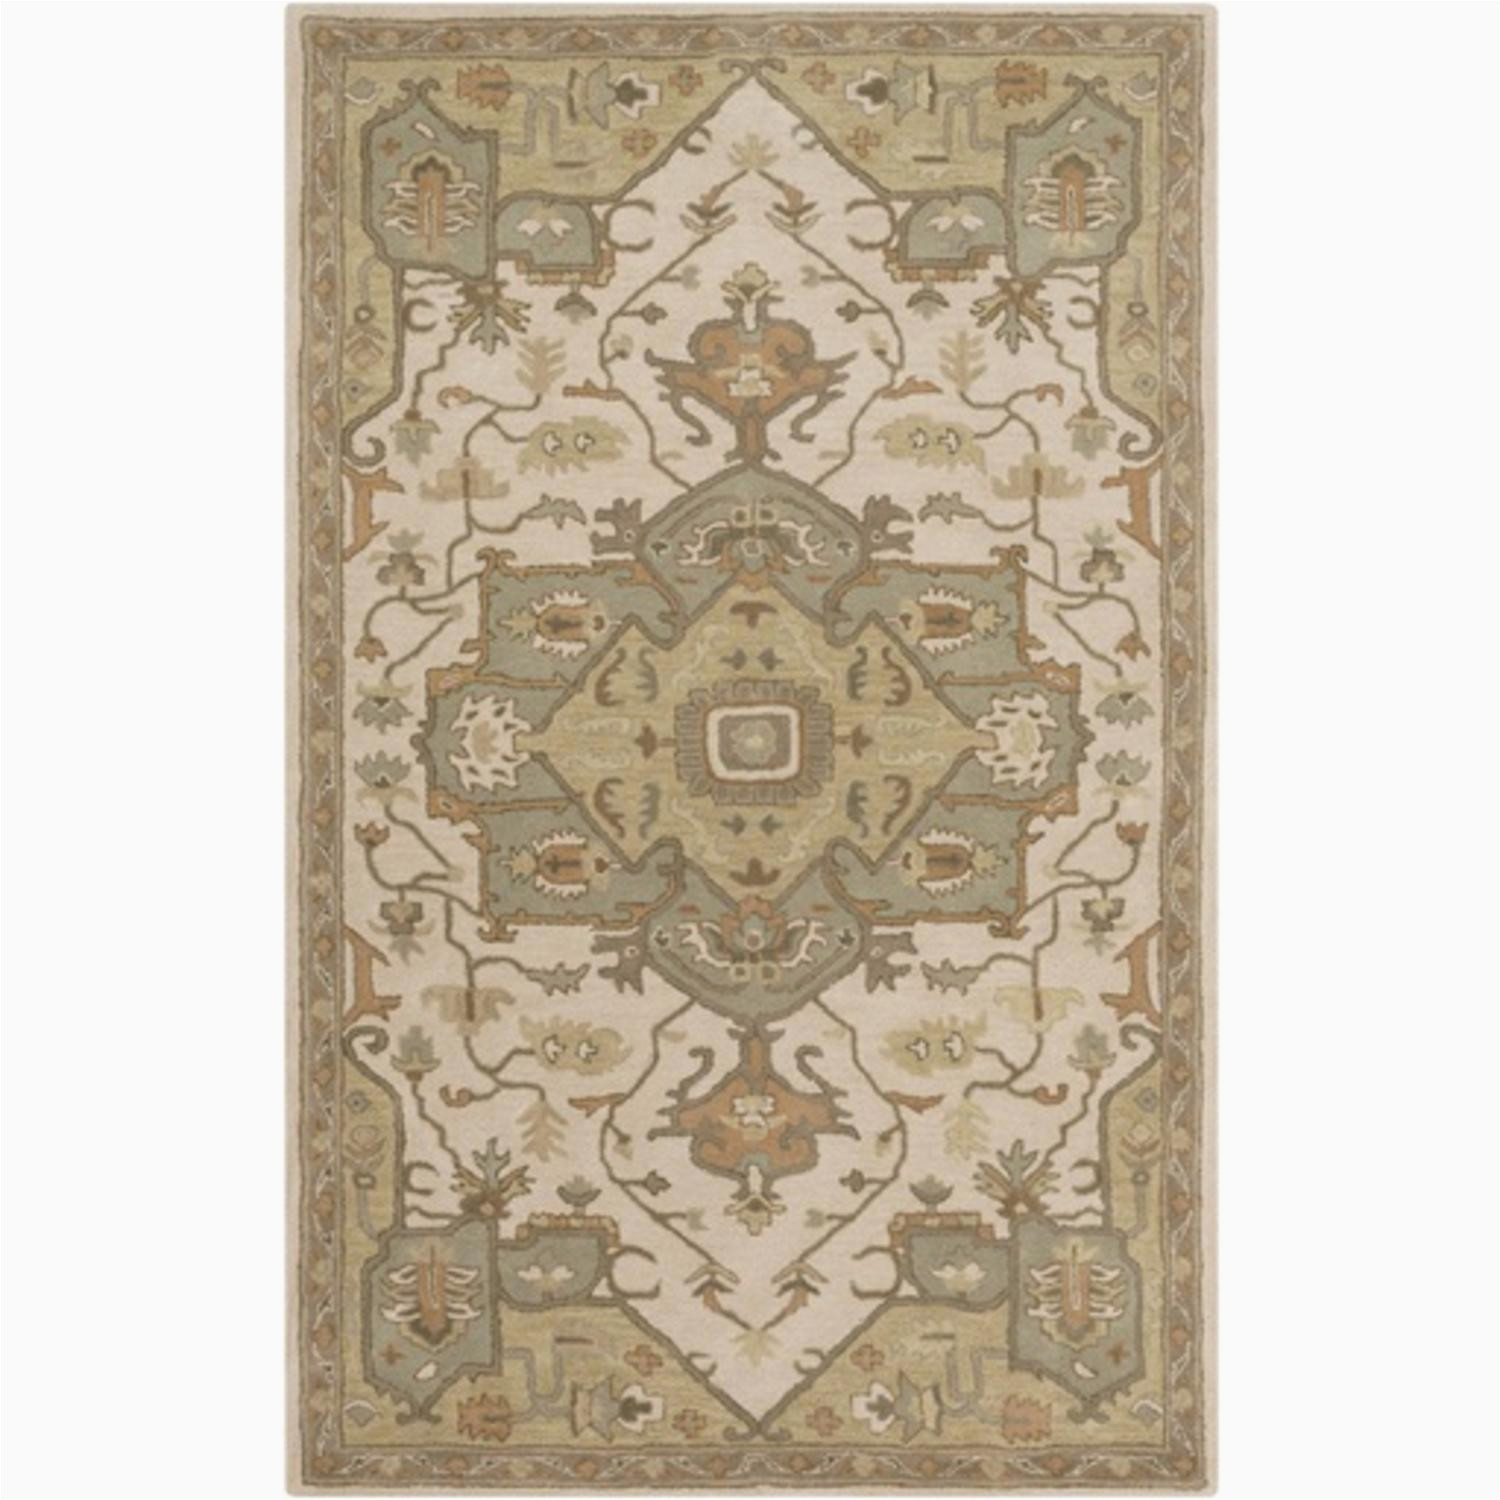 Sage Green and Beige area Rugs 4 X 6 Elegant Caesar Champagne Beige and Sage Green Hand